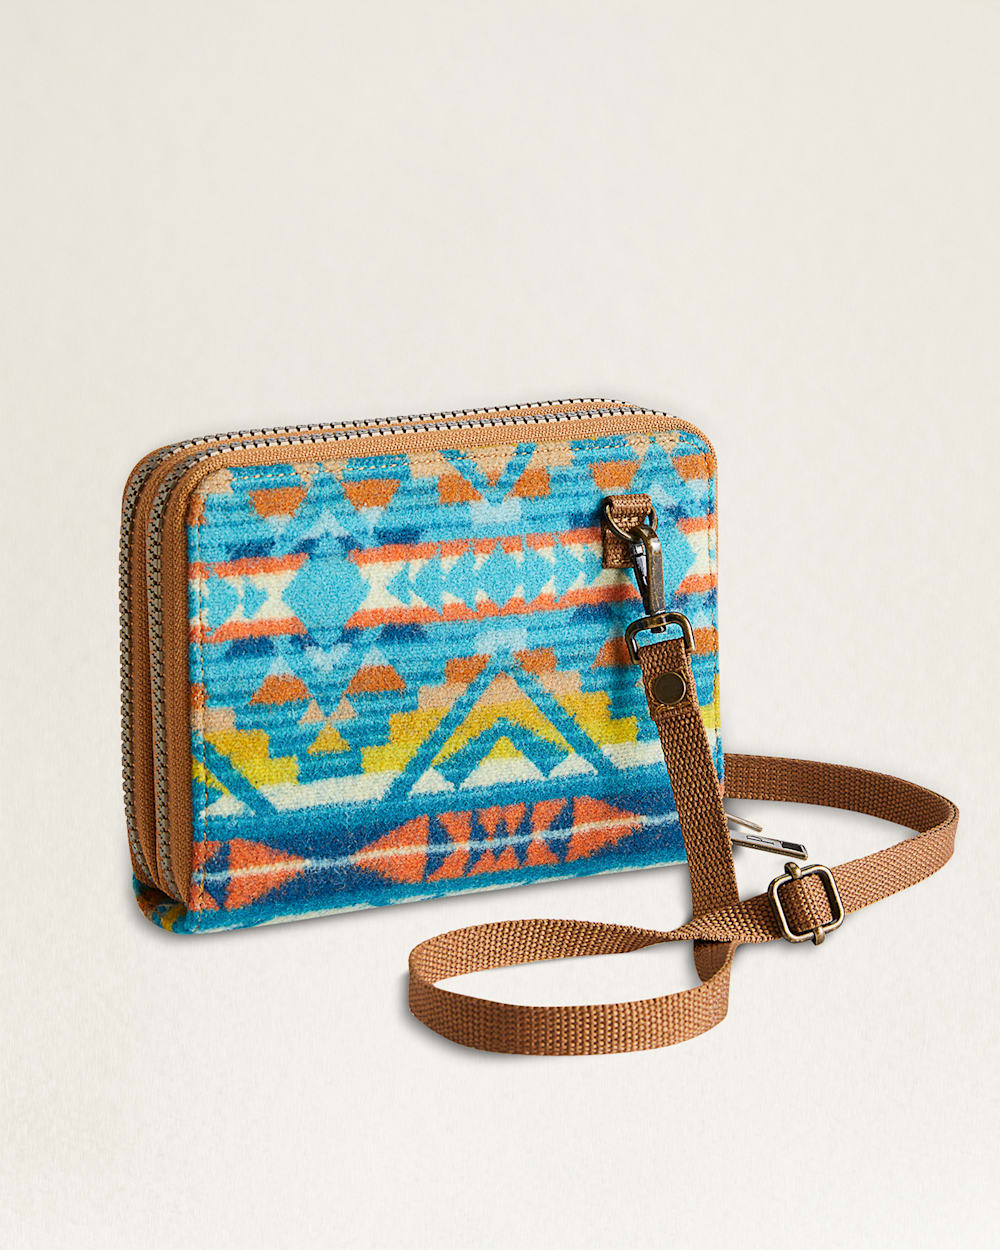 ALTERNATE VIEW OF CROSSBODY WALLET IN TURQUOISE ALTO MESA image number 2